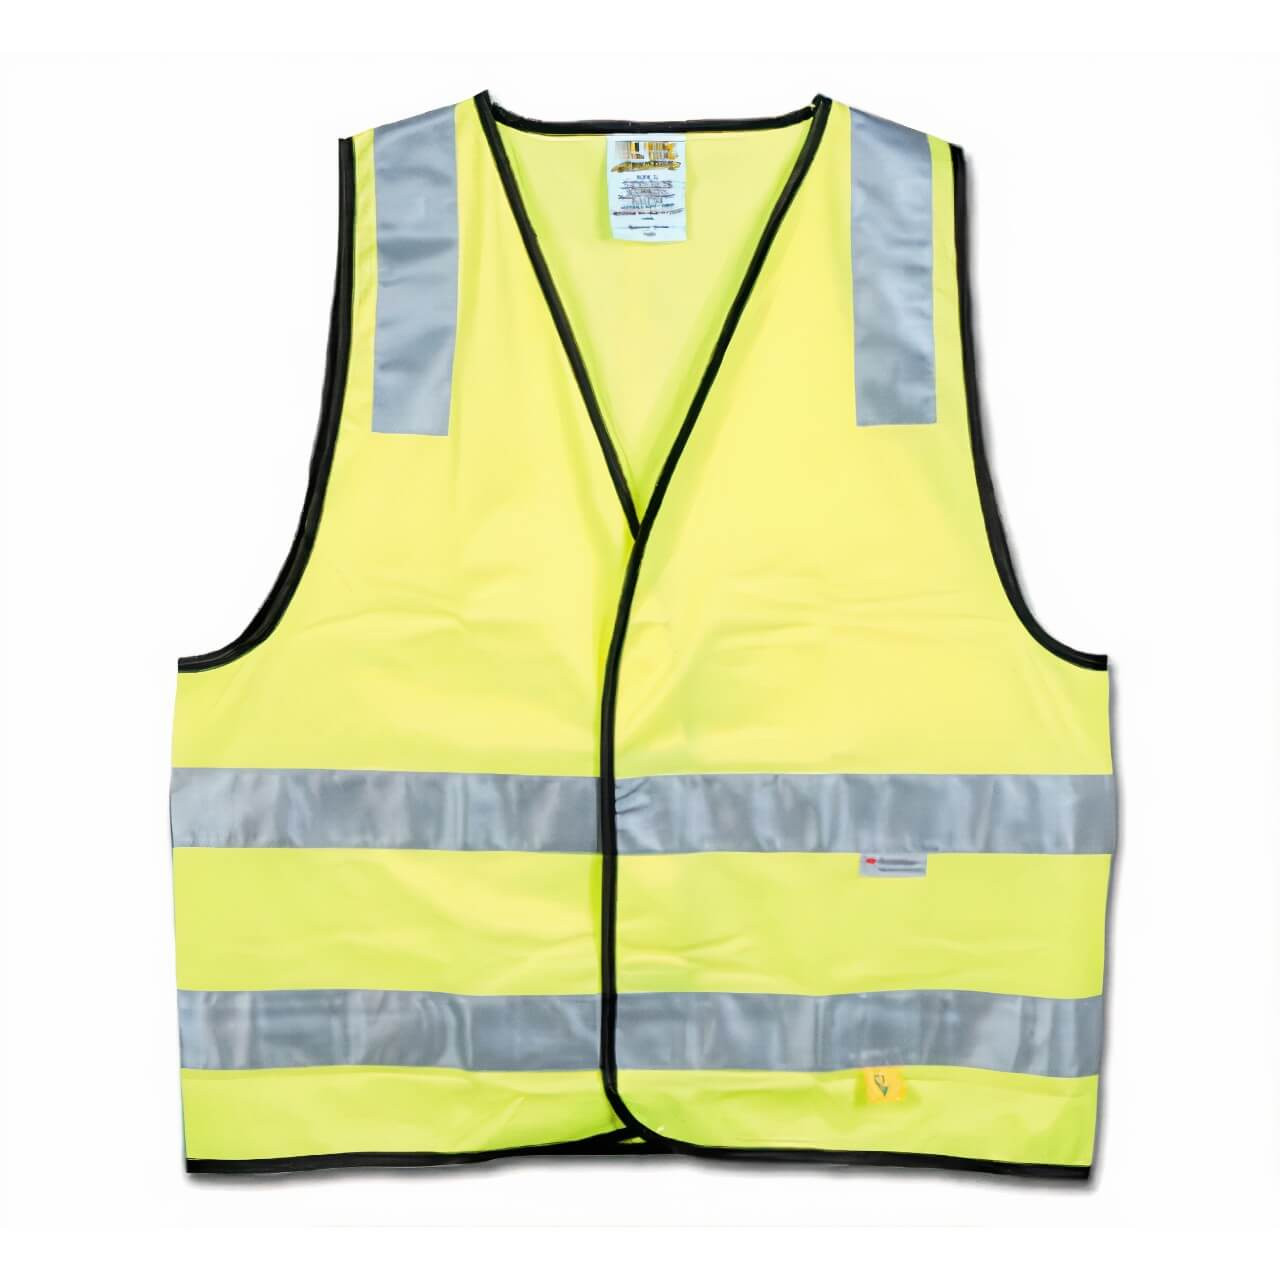 Maxisafe Hi-Vis Yellow Safety Vest Day/Night Use